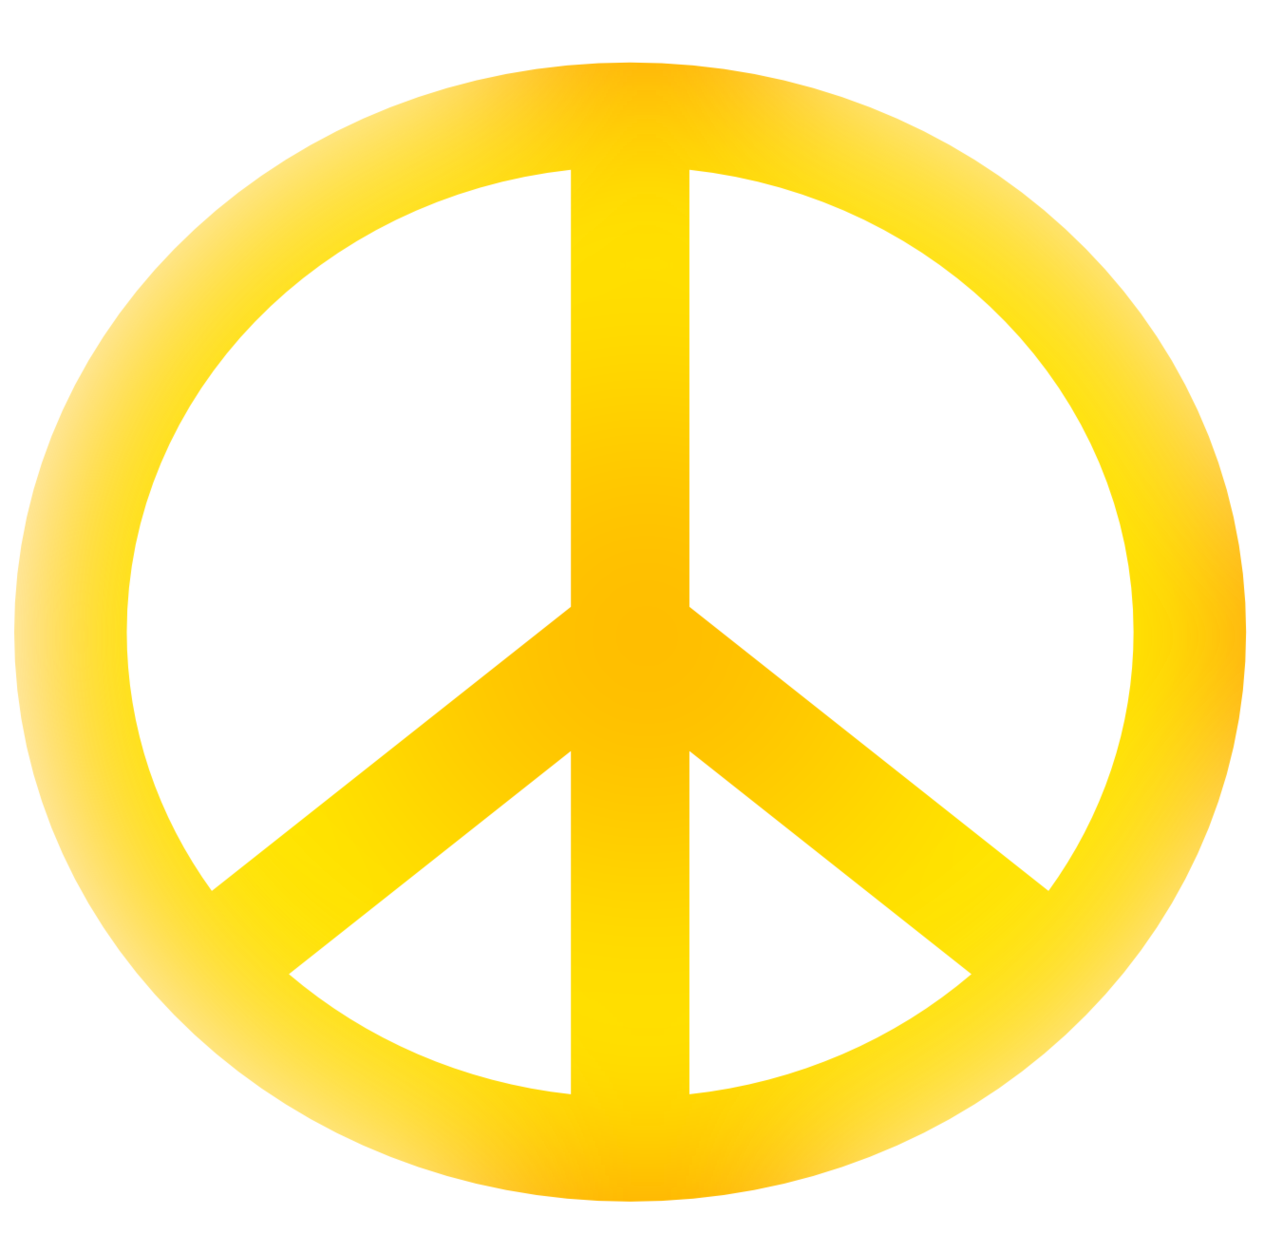 Peace Sign Pics Clipart - Free to use Clip Art Resource